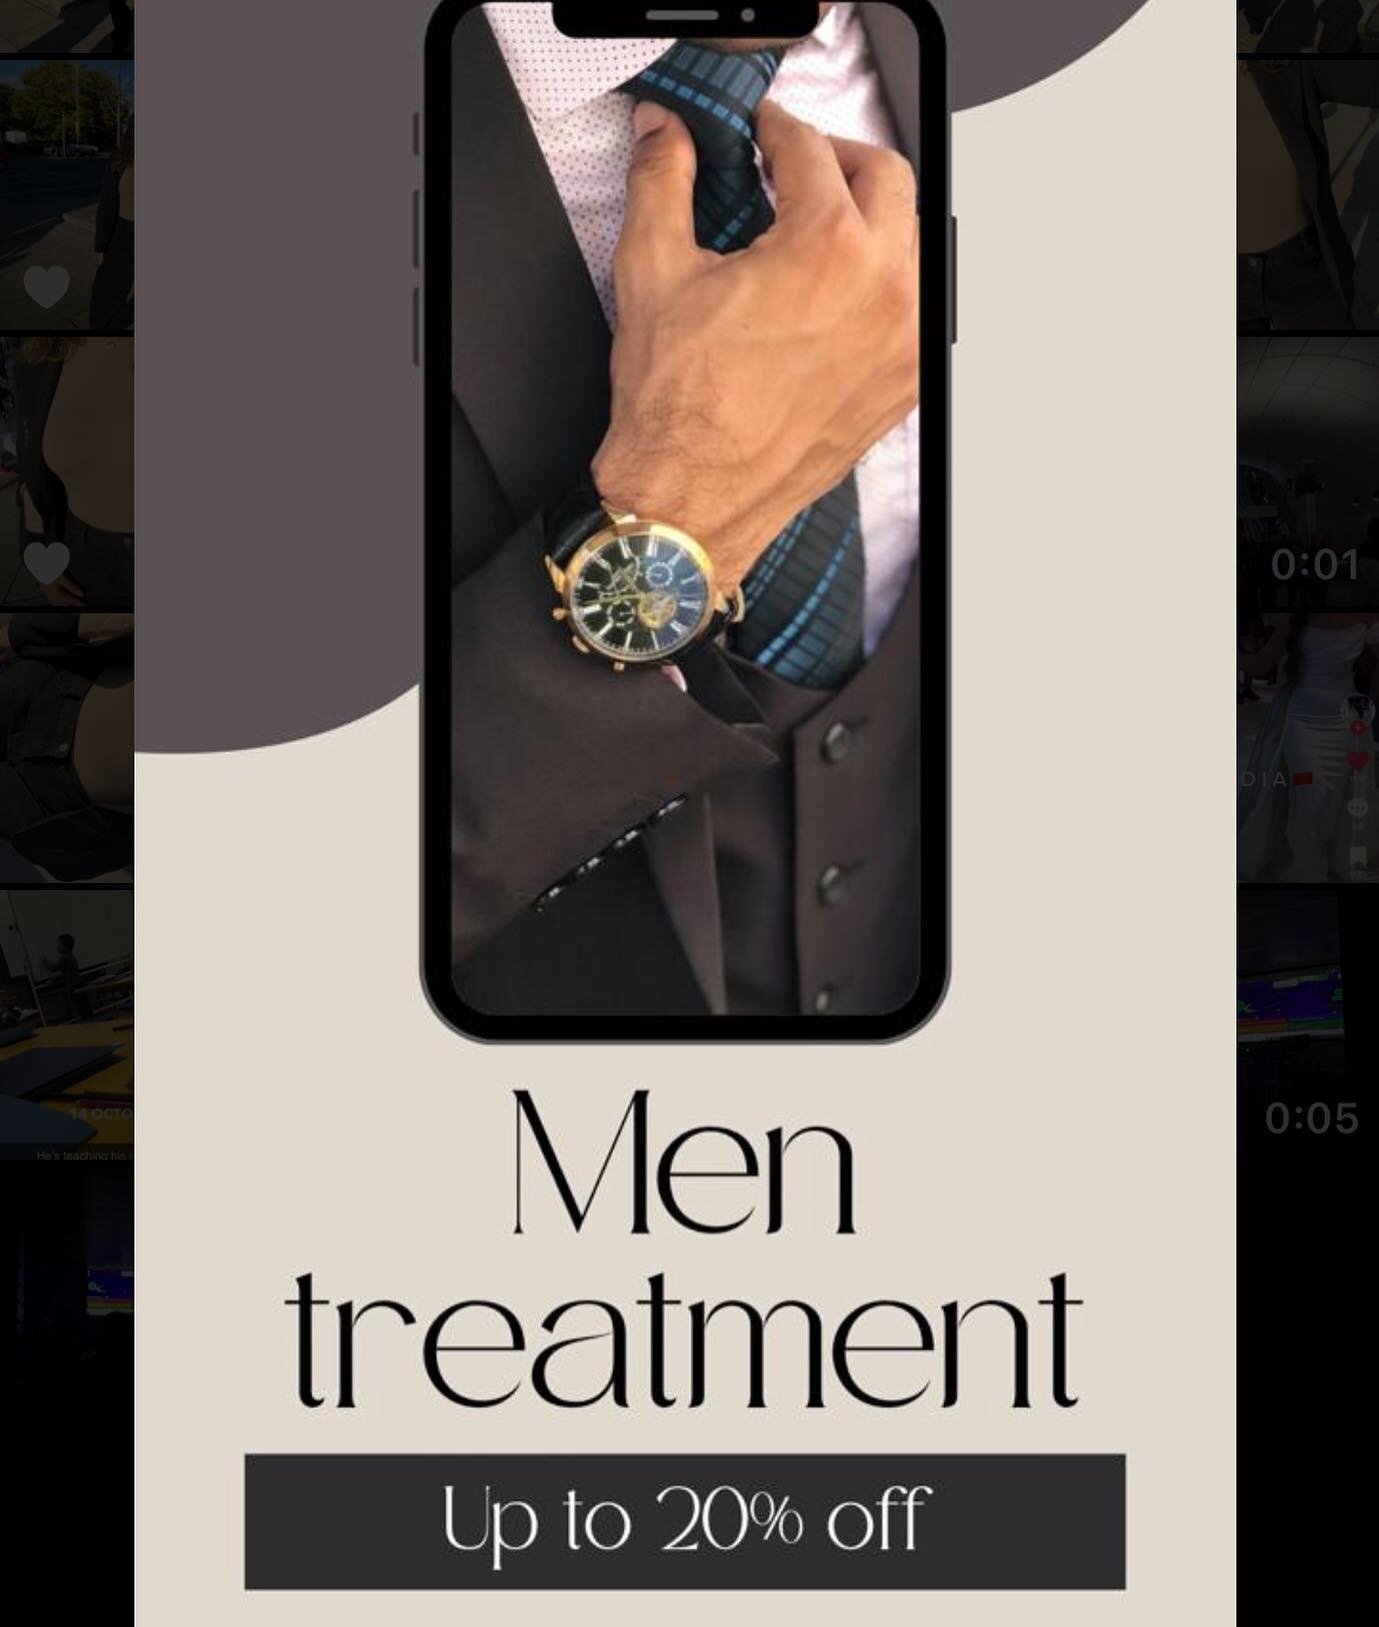 Men treatments are also available!! You can get 20% off any treatments. DM or call for any enquiries. #mayfair #salon